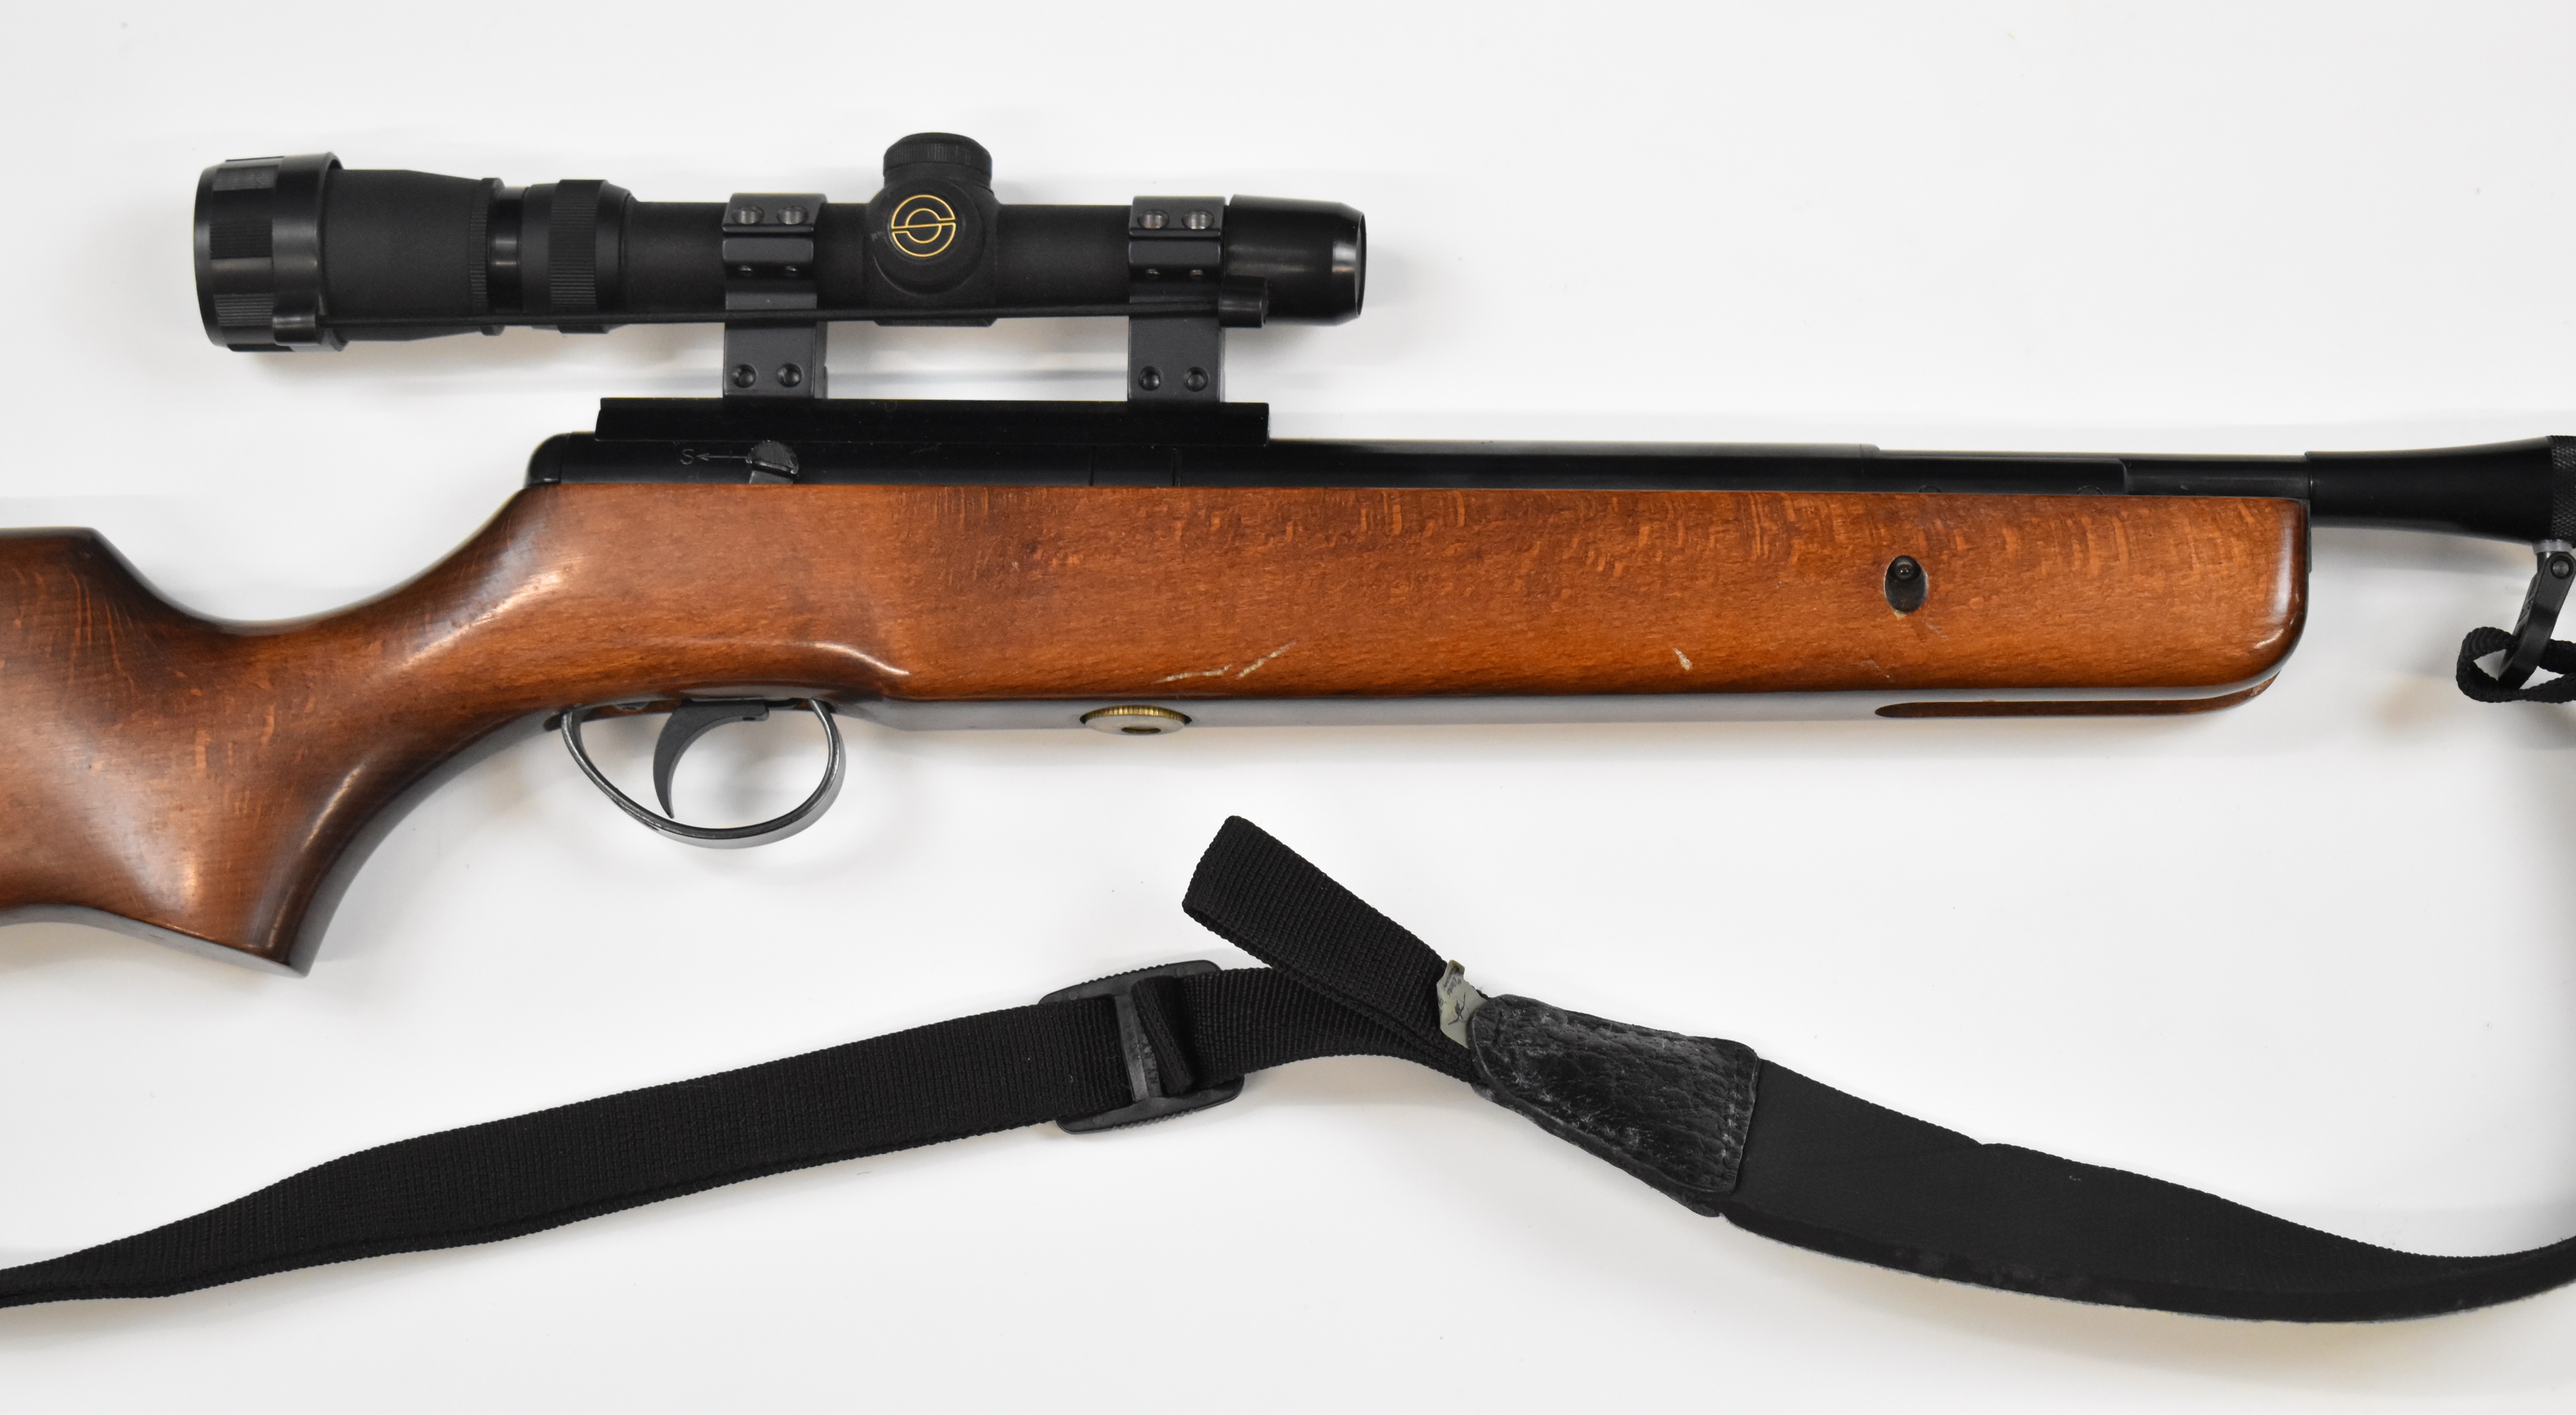 BSA Spitfire .22 air rifle with semi-pistol grip, raised cheek piece, sling, sound moderator and - Image 4 of 9